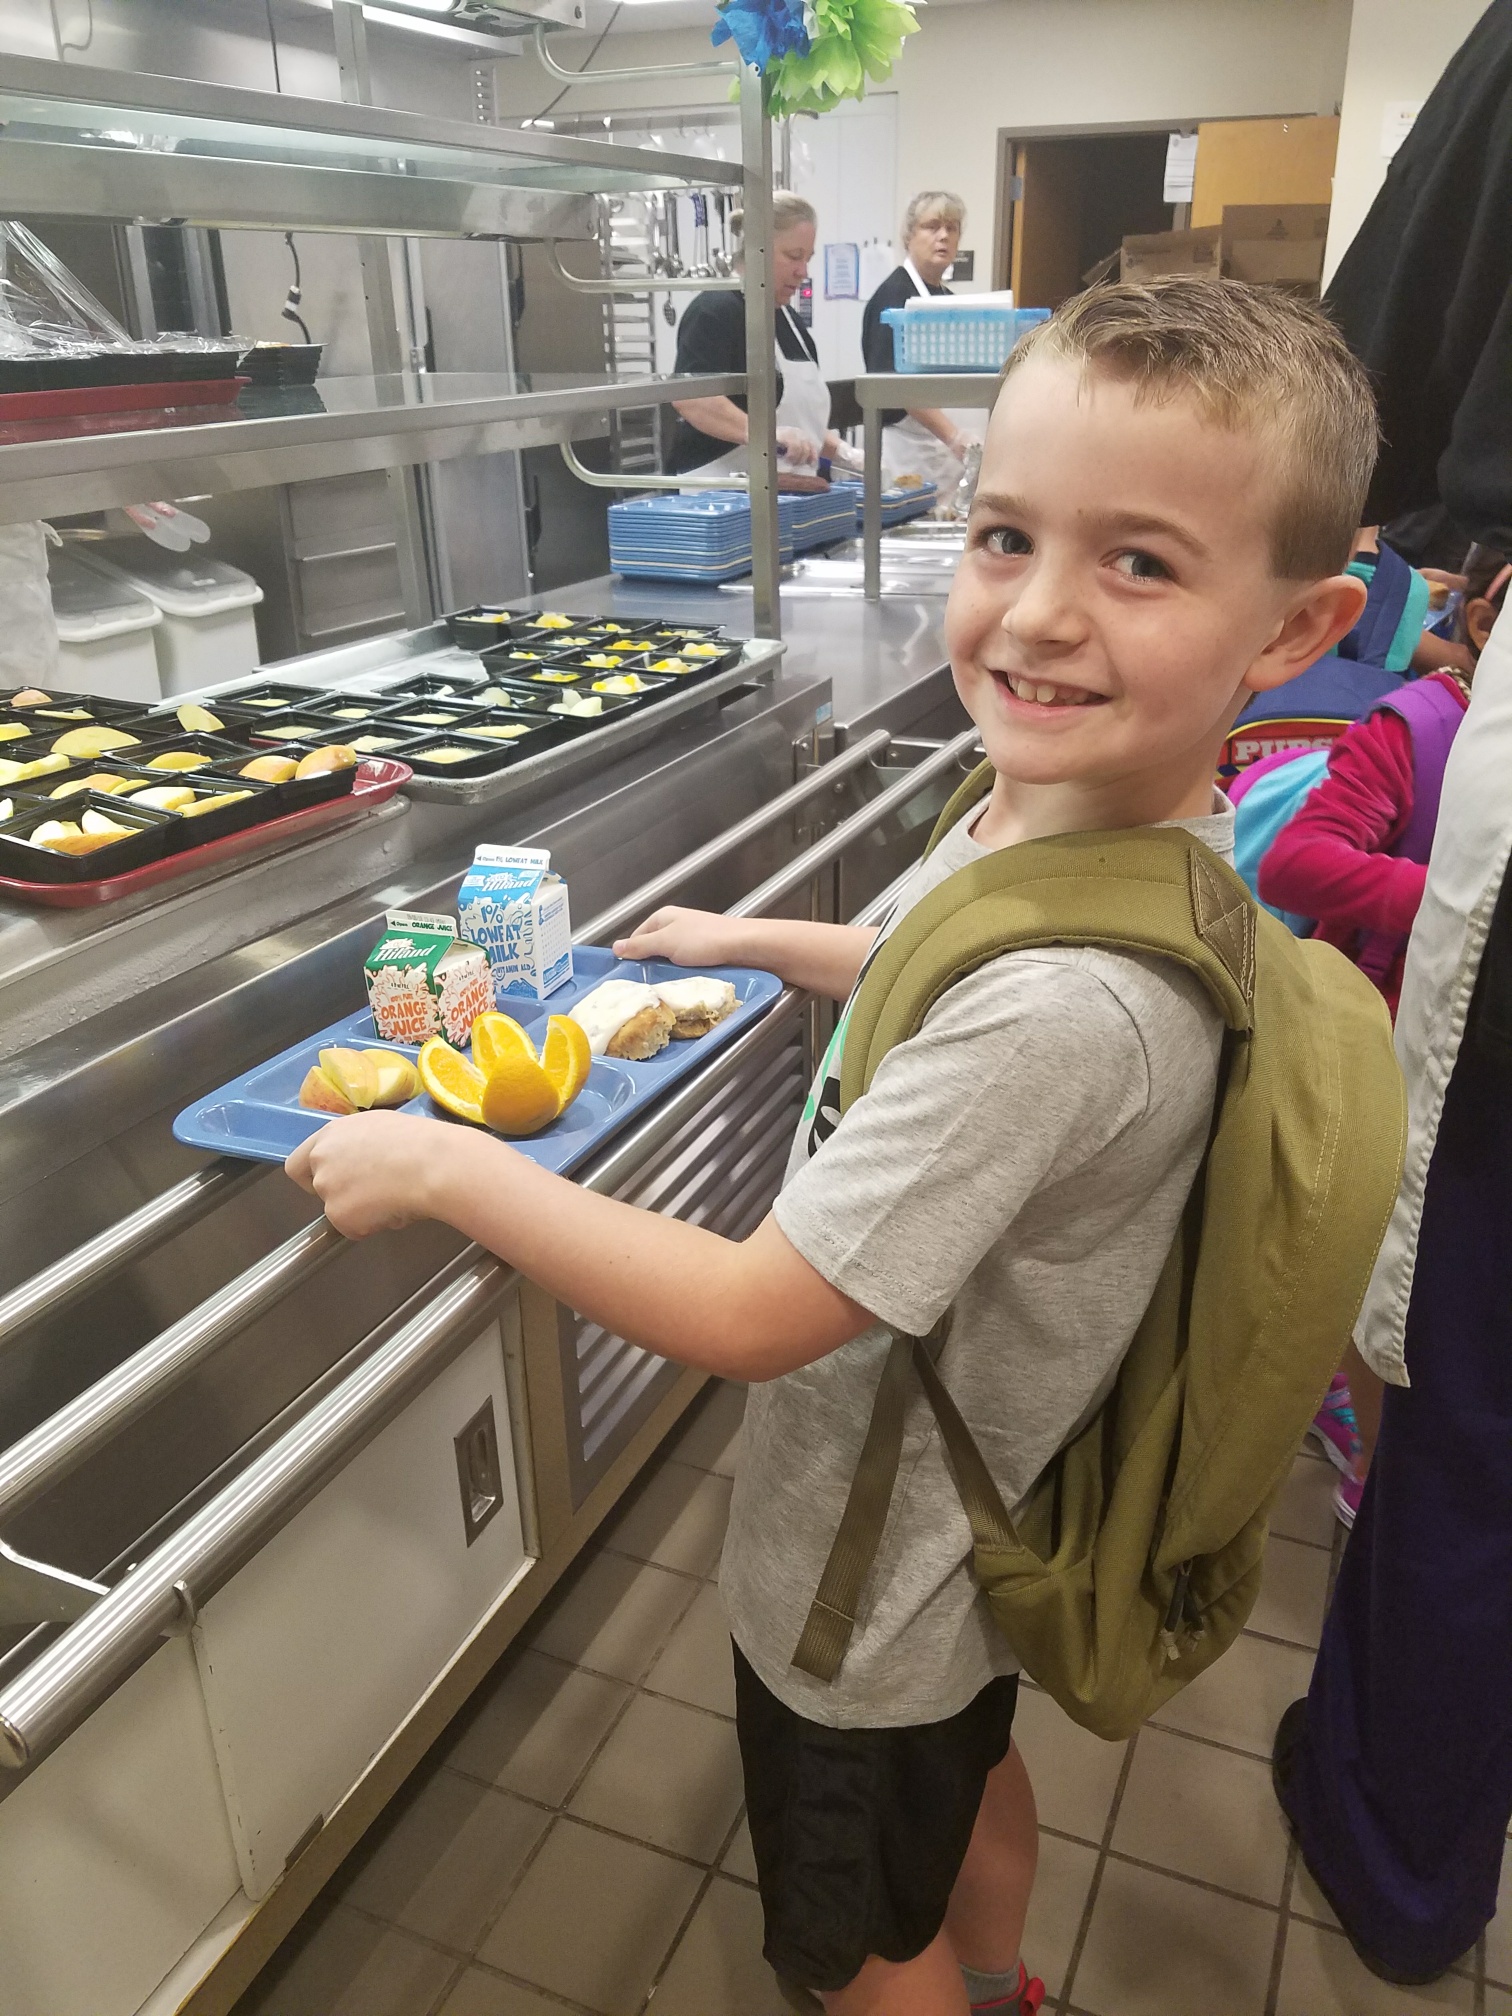 VBSD provides free breakfast to all students